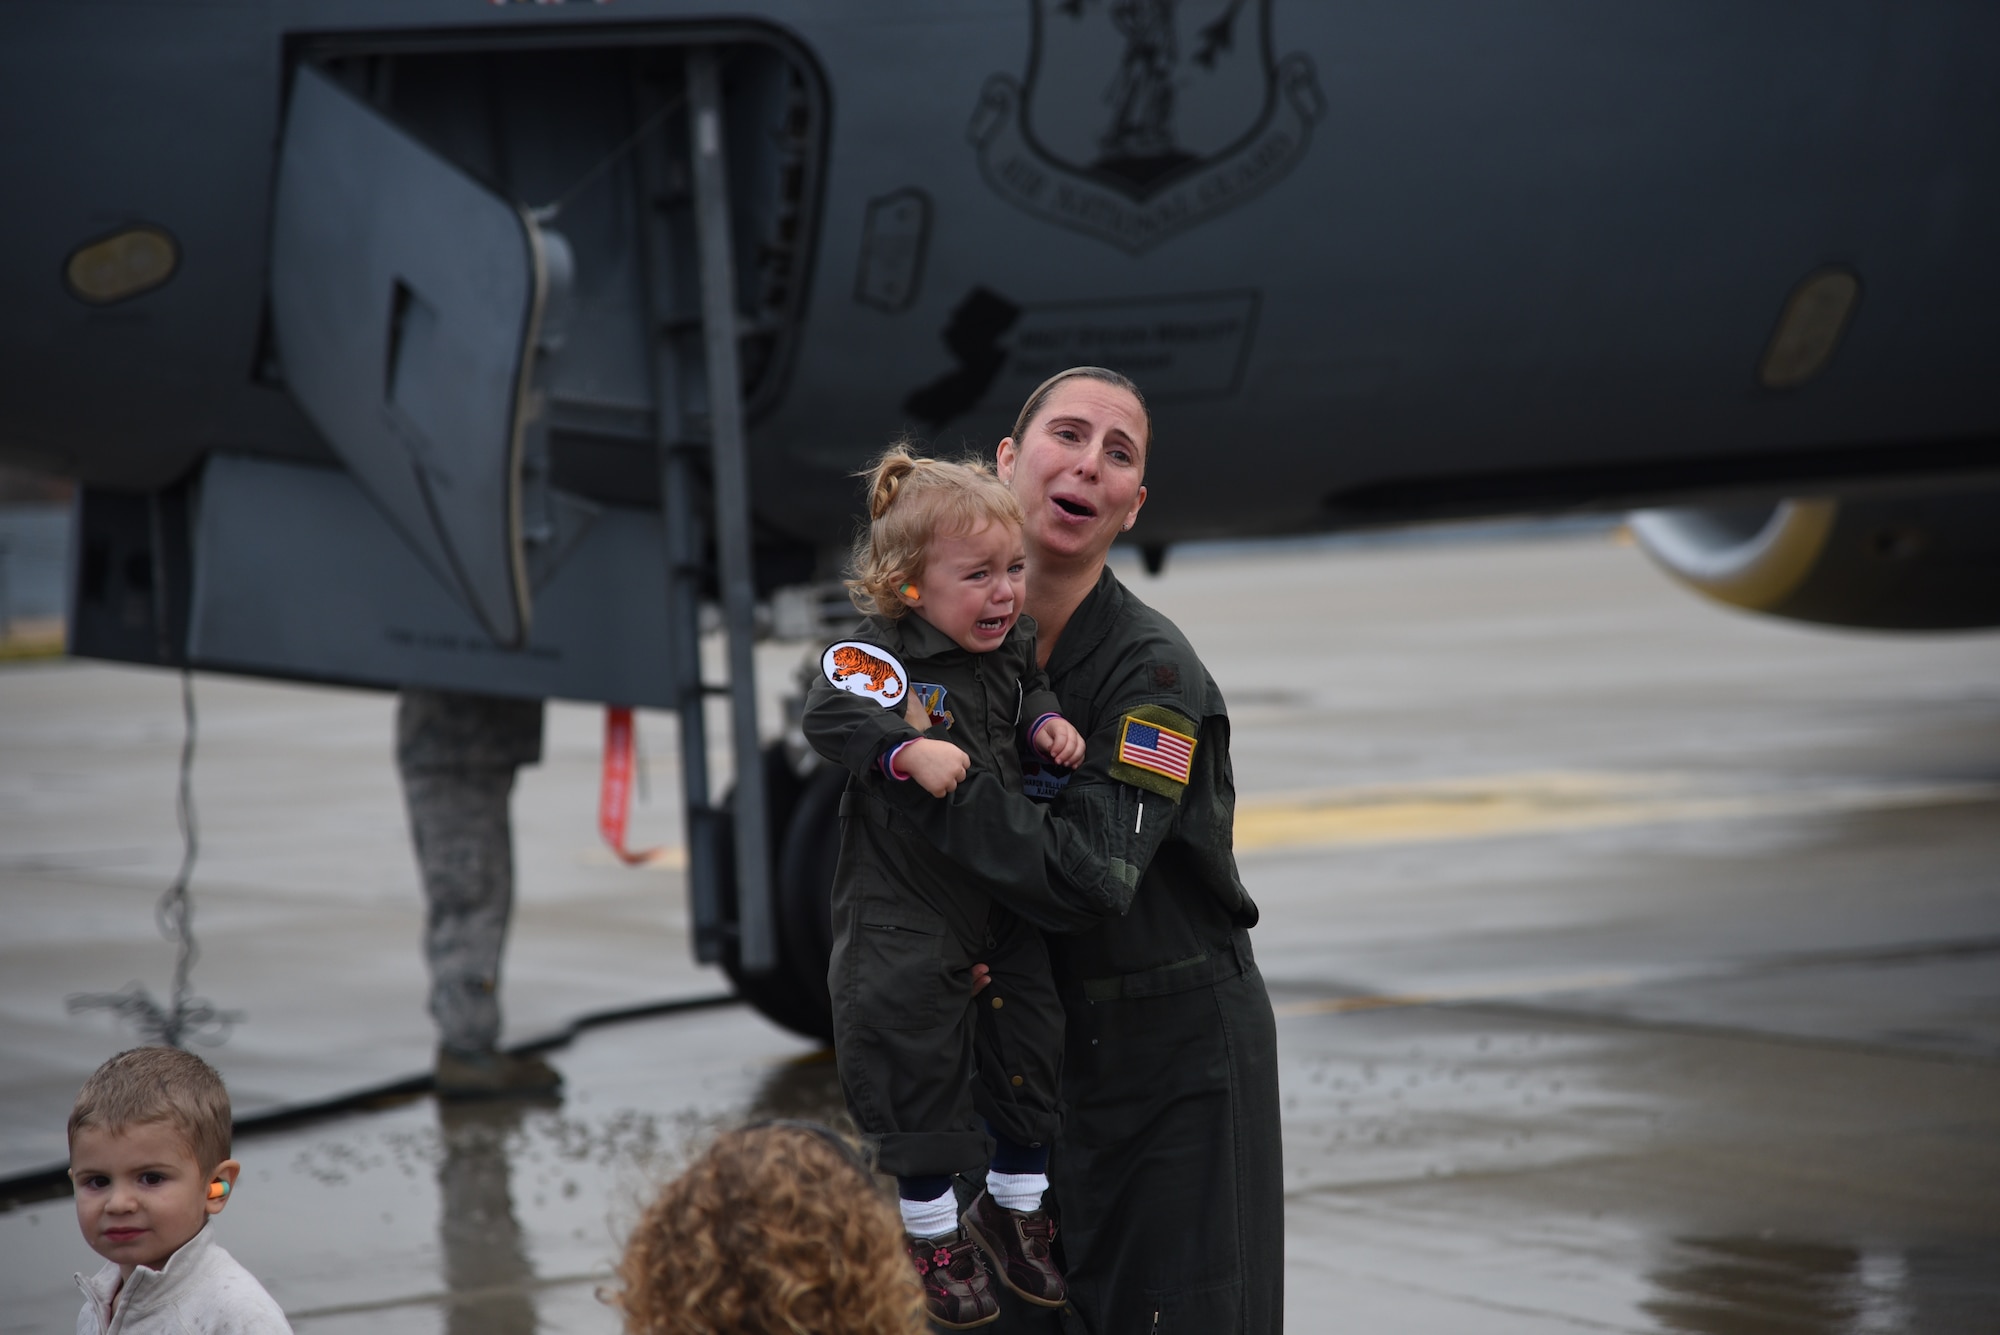 Maj. Sharon Gilliand, a KC-135 Stratotanker pilot with the 108th Wing, receives a celebratory spraying from her husband Maj. Kiel Gilliand, children Garrett and Lacey, fellow pilots and crew members following her final flight for the 108th Wing at Joint Base Mcguire-Dix-Lakehurst on Nov. 5, 2015. Gilliland, a pilot for 12 years with the New Jersey Air National Guard’s 108th Wing is ceremonially hosed down as she leaves piloting to others and takes a non-flying job with the 514th AMOS, Air Force Reserve so she can devote more time to her family. During her time in the 108th Wing, Gilliland deployed three times and has 60 combat sorties to her credit. (U.S. Air National Guard photo by Master Sgt. Carl Clegg/Released)